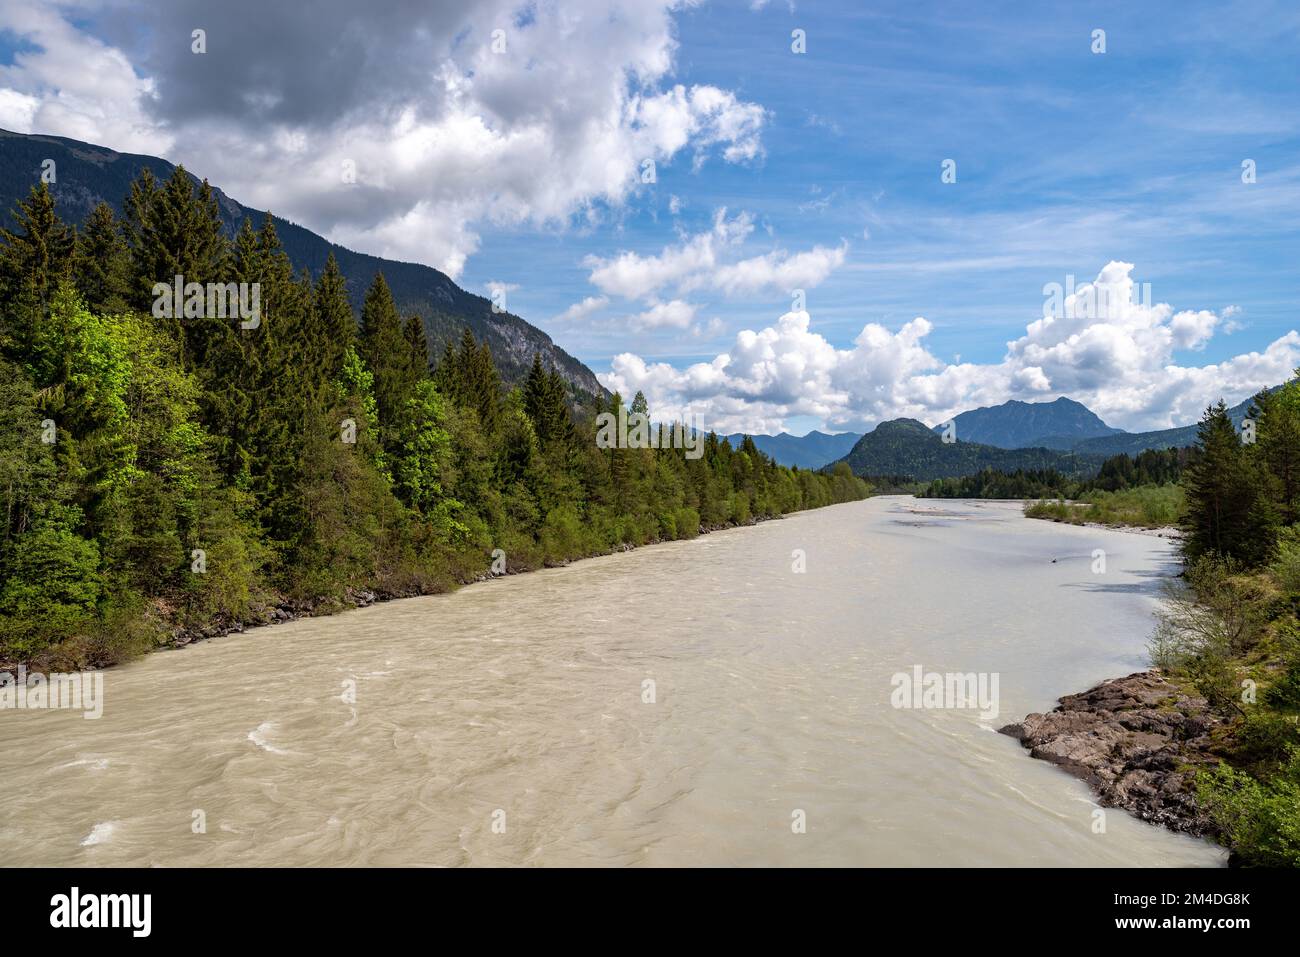 Fantastic view over the Lechtal valley with mountains in the background on a sunny day near Reutte in Tyrol. White clouds in blue sky Stock Photo